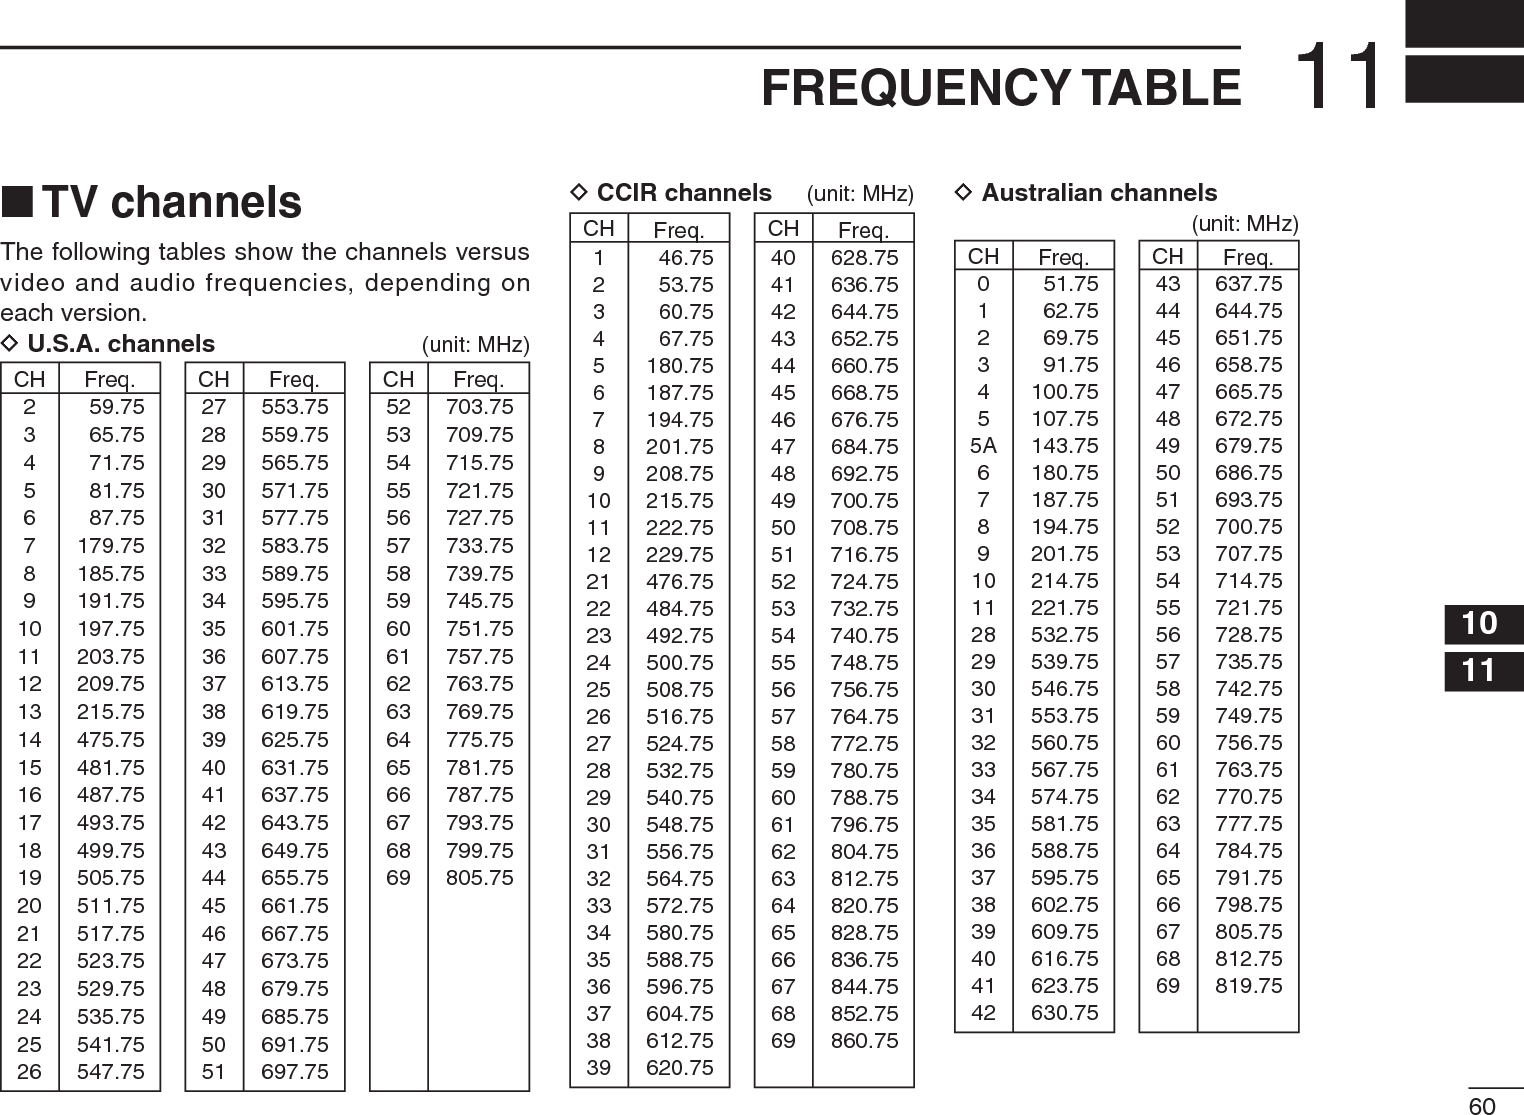 6011FREQUENCY TABLE1011N TV channelsThe following tables show the channels versus video and audio frequencies, depending on each version.D U.S.A. channels (unit: MHz)CH Freq.2 59.753 65.754 71.755 81.756 87.757 179.758 185.759 191.7510 197.7511 203.7512 209.7513 215.7514 475.7515 481.7516 487.7517 493.7518 499.7519 505.7520 511.7521 517.7522 523.7523 529.7524 535.7525 541.7526 547.75CH Freq.27 553.7528 559.7529 565.7530 571.7531 577.7532 583.7533 589.7534 595.7535 601.7536 607.7537 613.7538 619.7539 625.7540 631.7541 637.7542 643.7543 649.7544 655.7545 661.7546 667.7547 673.7548 679.7549 685.7550 691.7551 697.75CH Freq.52 703.7553 709.7554 715.7555 721.7556 727.7557 733.7558 739.7559 745.7560 751.7561 757.7562 763.7563 769.7564 775.7565 781.7566 787.7567 793.7568 799.7569 805.75D CCIR channels (unit: MHz)CH Freq.1 46.752 53.753 60.754 67.755 180.756 187.757 194.758 201.759 208.7510 215.7511 222.7512 229.7521 476.7522 484.7523 492.7524 500.7525 508.7526 516.7527 524.7528 532.7529 540.7530 548.7531 556.7532 564.7533 572.7534 580.7535 588.7536 596.7537 604.7538 612.7539 620.75CH Freq.40 628.7541 636.7542 644.7543 652.7544 660.7545 668.7546 676.7547 684.7548 692.7549 700.7550 708.7551 716.7552 724.7553 732.7554 740.7555 748.7556 756.7557 764.7558 772.7559 780.7560 788.7561 796.7562 804.7563 812.7564 820.7565 828.7566 836.7567 844.7568 852.7569 860.75D Australian channels(unit: MHz)CH Freq.0 51.751 62.752 69.753 91.754 100.755 107.755A 143.756 180.757 187.758 194.759 201.7510 214.7511 221.7528 532.7529 539.7530 546.7531 553.7532 560.7533 567.7534 574.7535 581.7536 588.7537 595.7538 602.7539 609.7540 616.7541 623.7542 630.75CH Freq.43 637.7544 644.7545 651.7546 658.7547 665.7548 672.7549 679.7550 686.7551 693.7552 700.7553 707.7554 714.7555 721.7556 728.7557 735.7558 742.7559 749.7560 756.7561 763.7562 770.7563 777.7564 784.7565 791.7566 798.7567 805.7568 812.7569 819.75